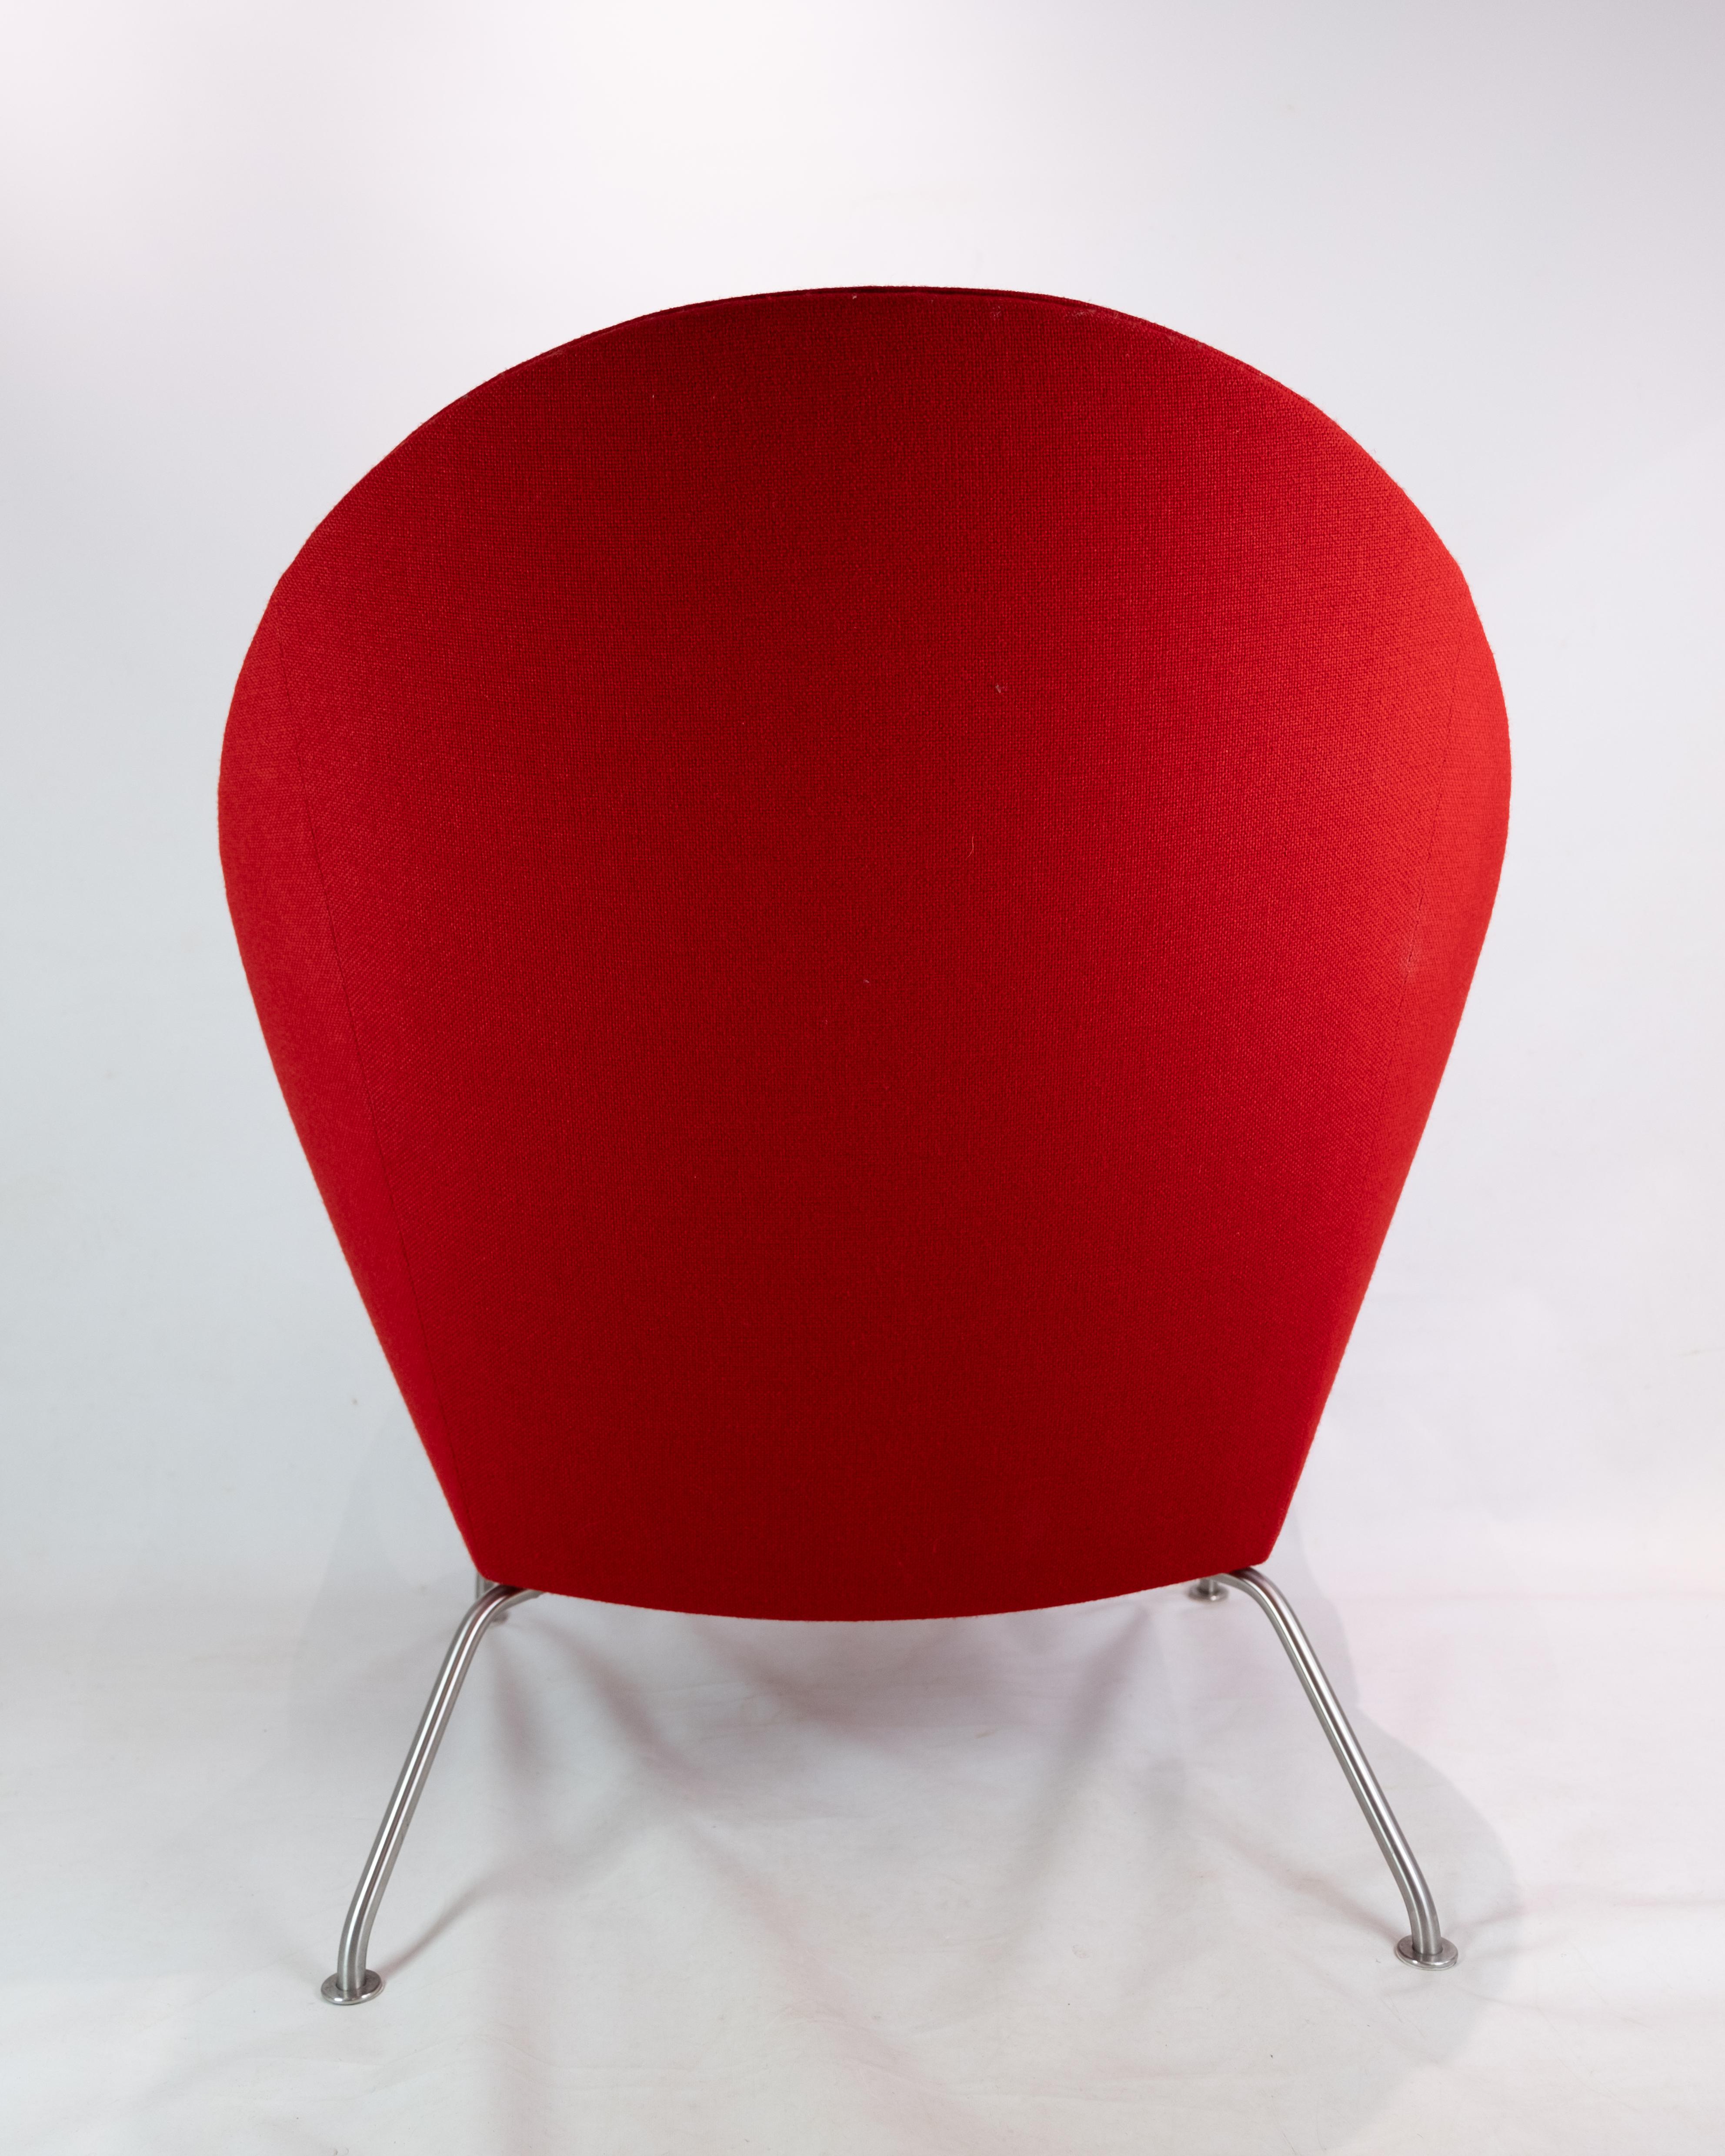 Contemporary Oculus Chair in Red Hallingdal Fabric Designed By Hans J. Wegner 